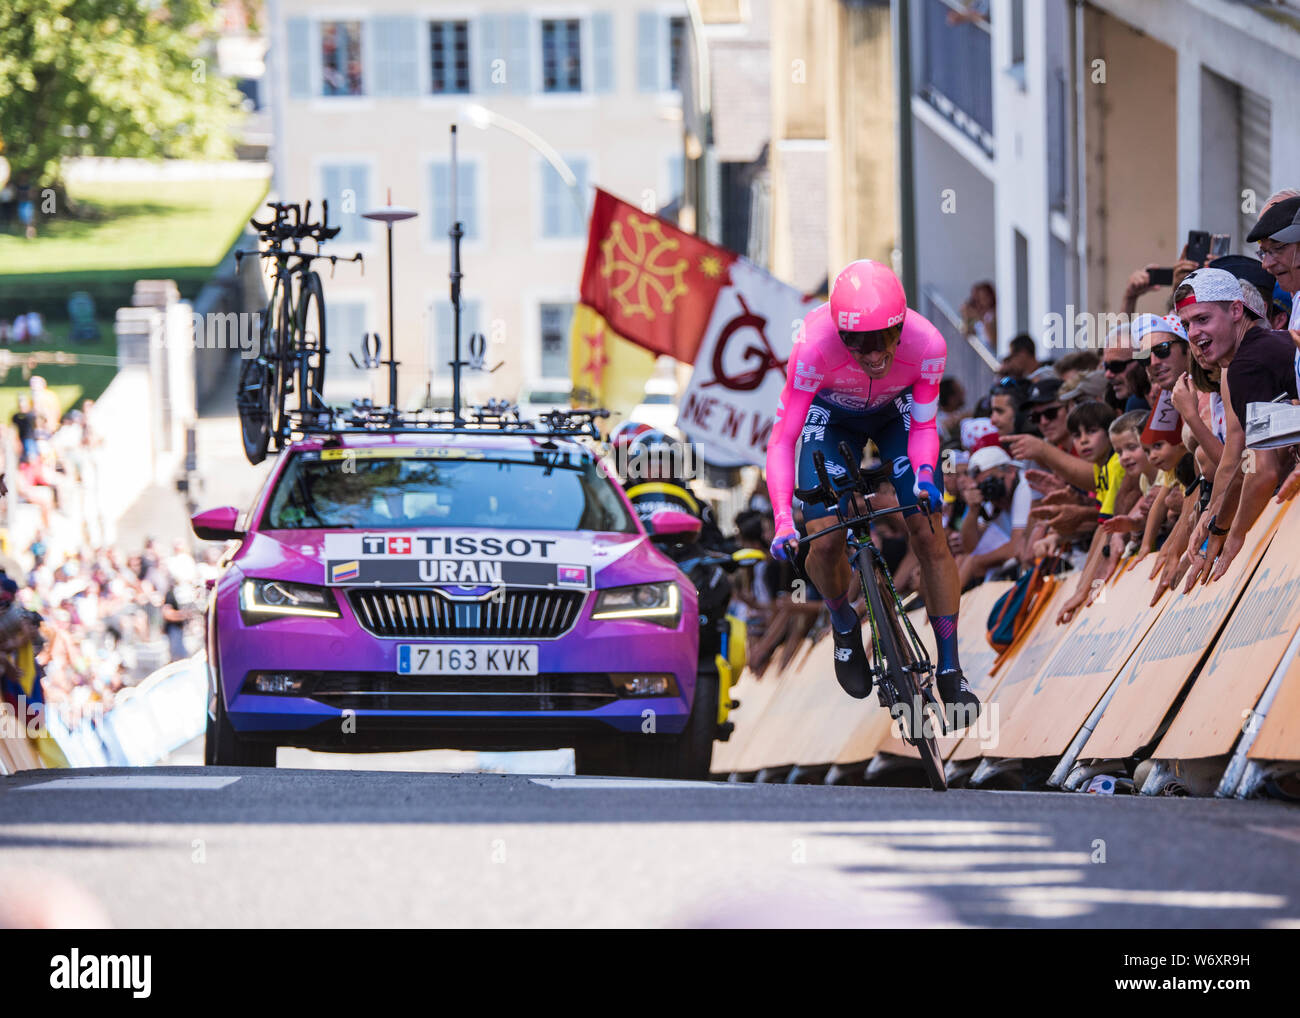 Rigoberto Uran racing in Pau during the 2019 Time Trial stage of le tour de france Stock Photo